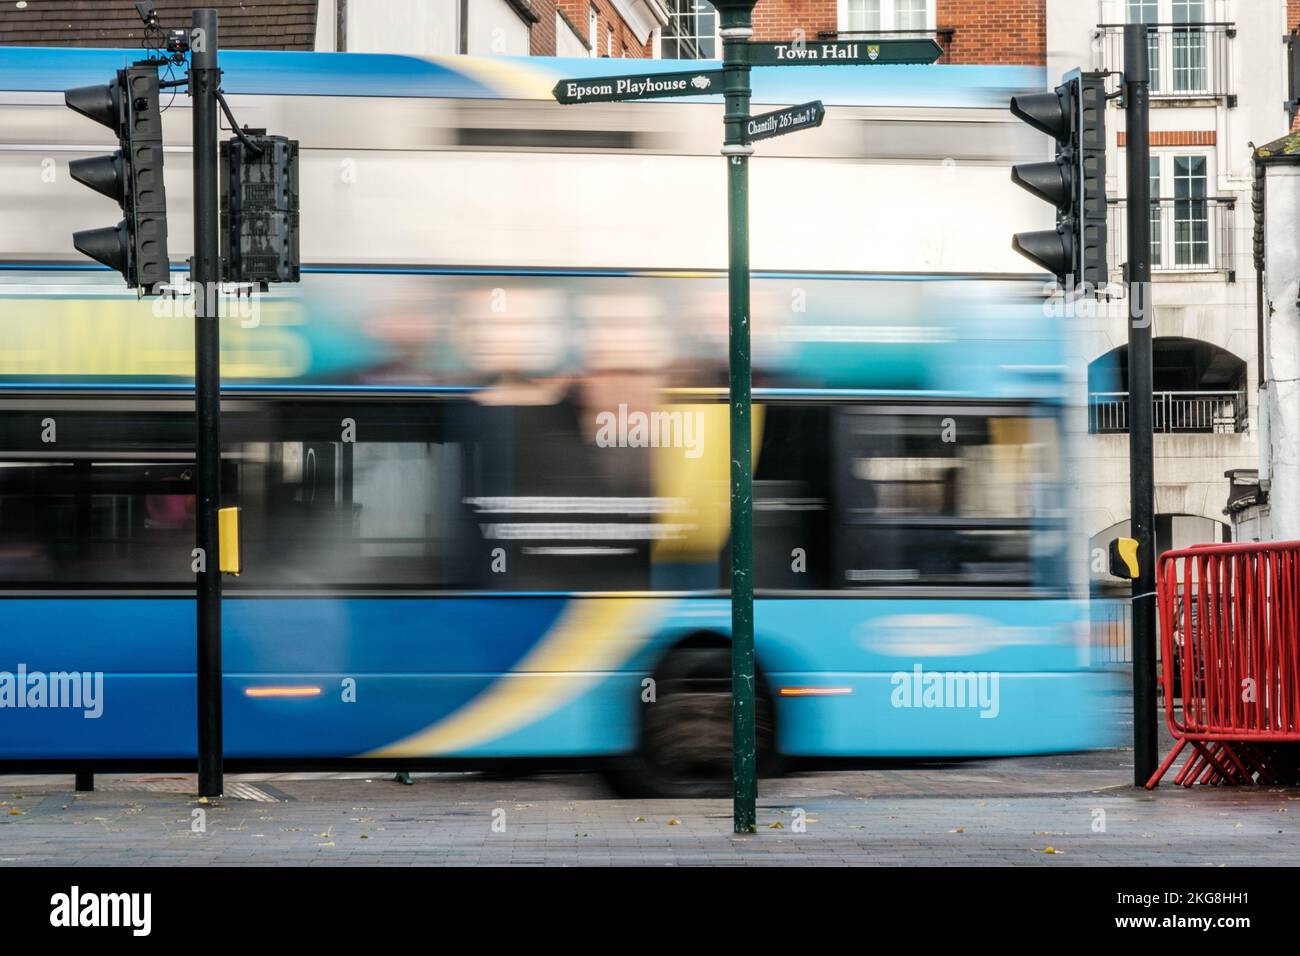 Epsom, Surrey, London UK, November 20 2022, Bus Passing Traffic Lights Implying Speed Motion And Movement With Blurred Image Effect Stock Photo